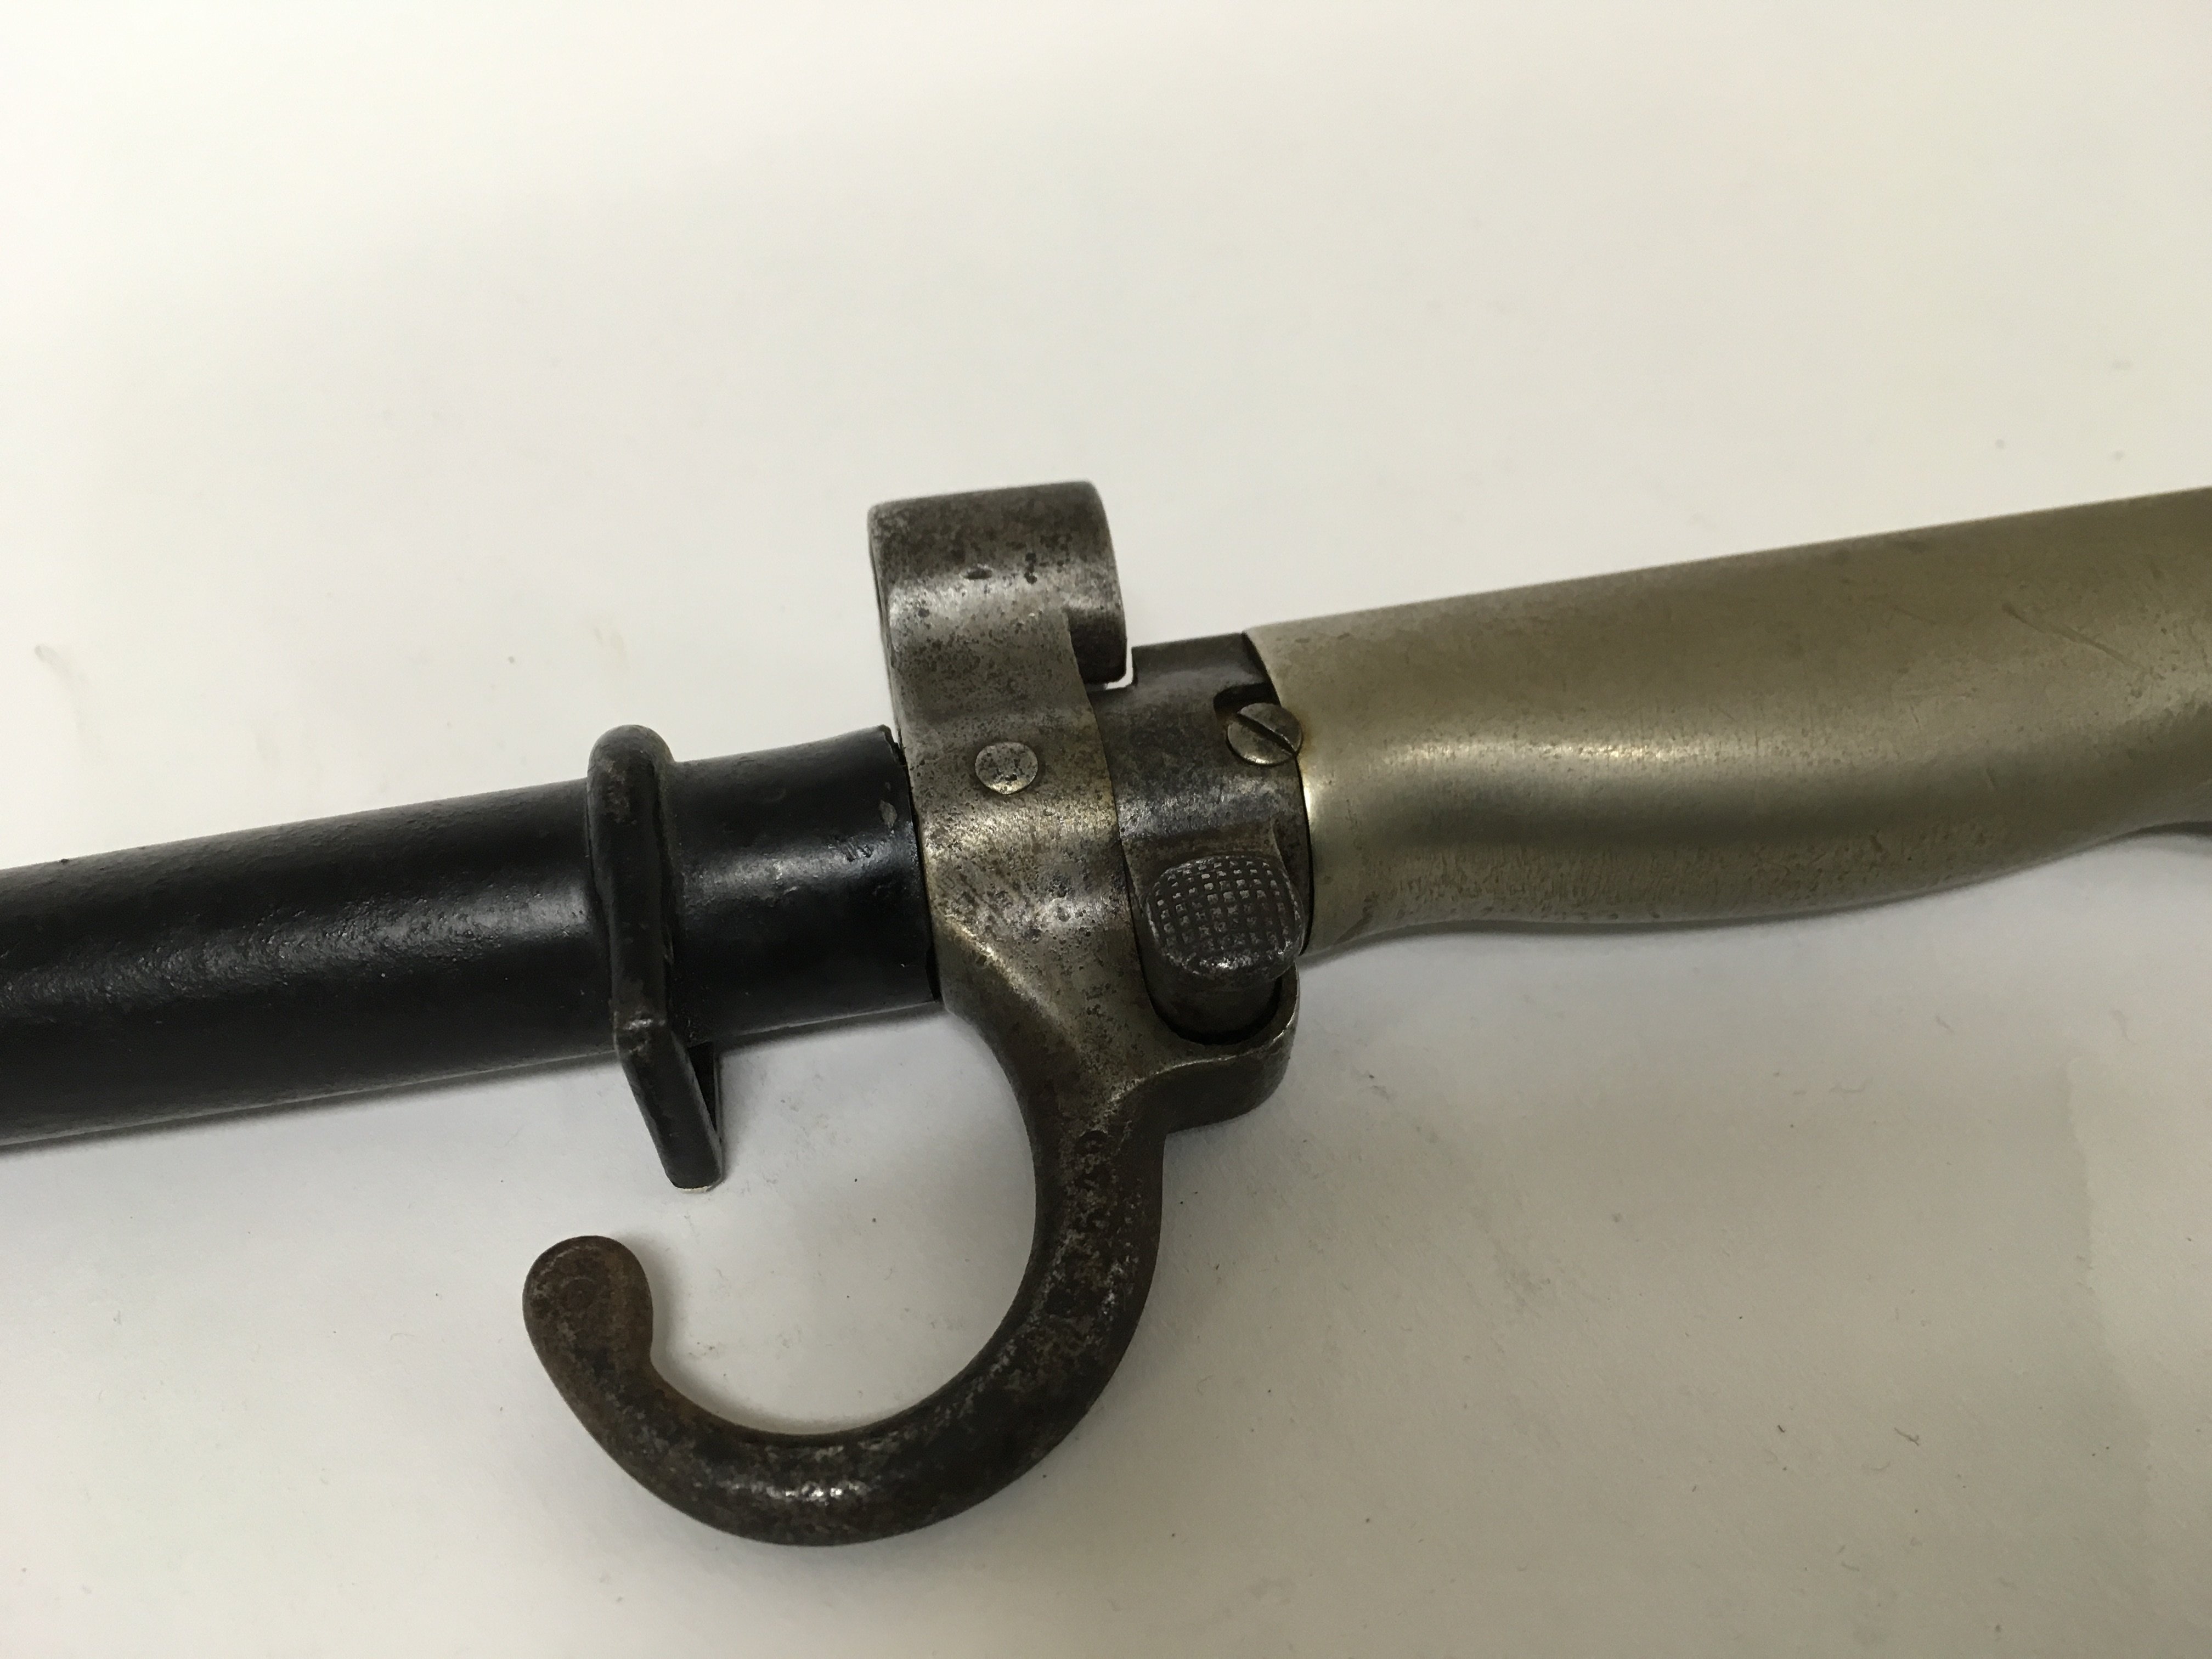 A French M1886 bayonet for use with the 8mm Lebel rifle. This bayonet has a locking mechanism for - Image 2 of 5